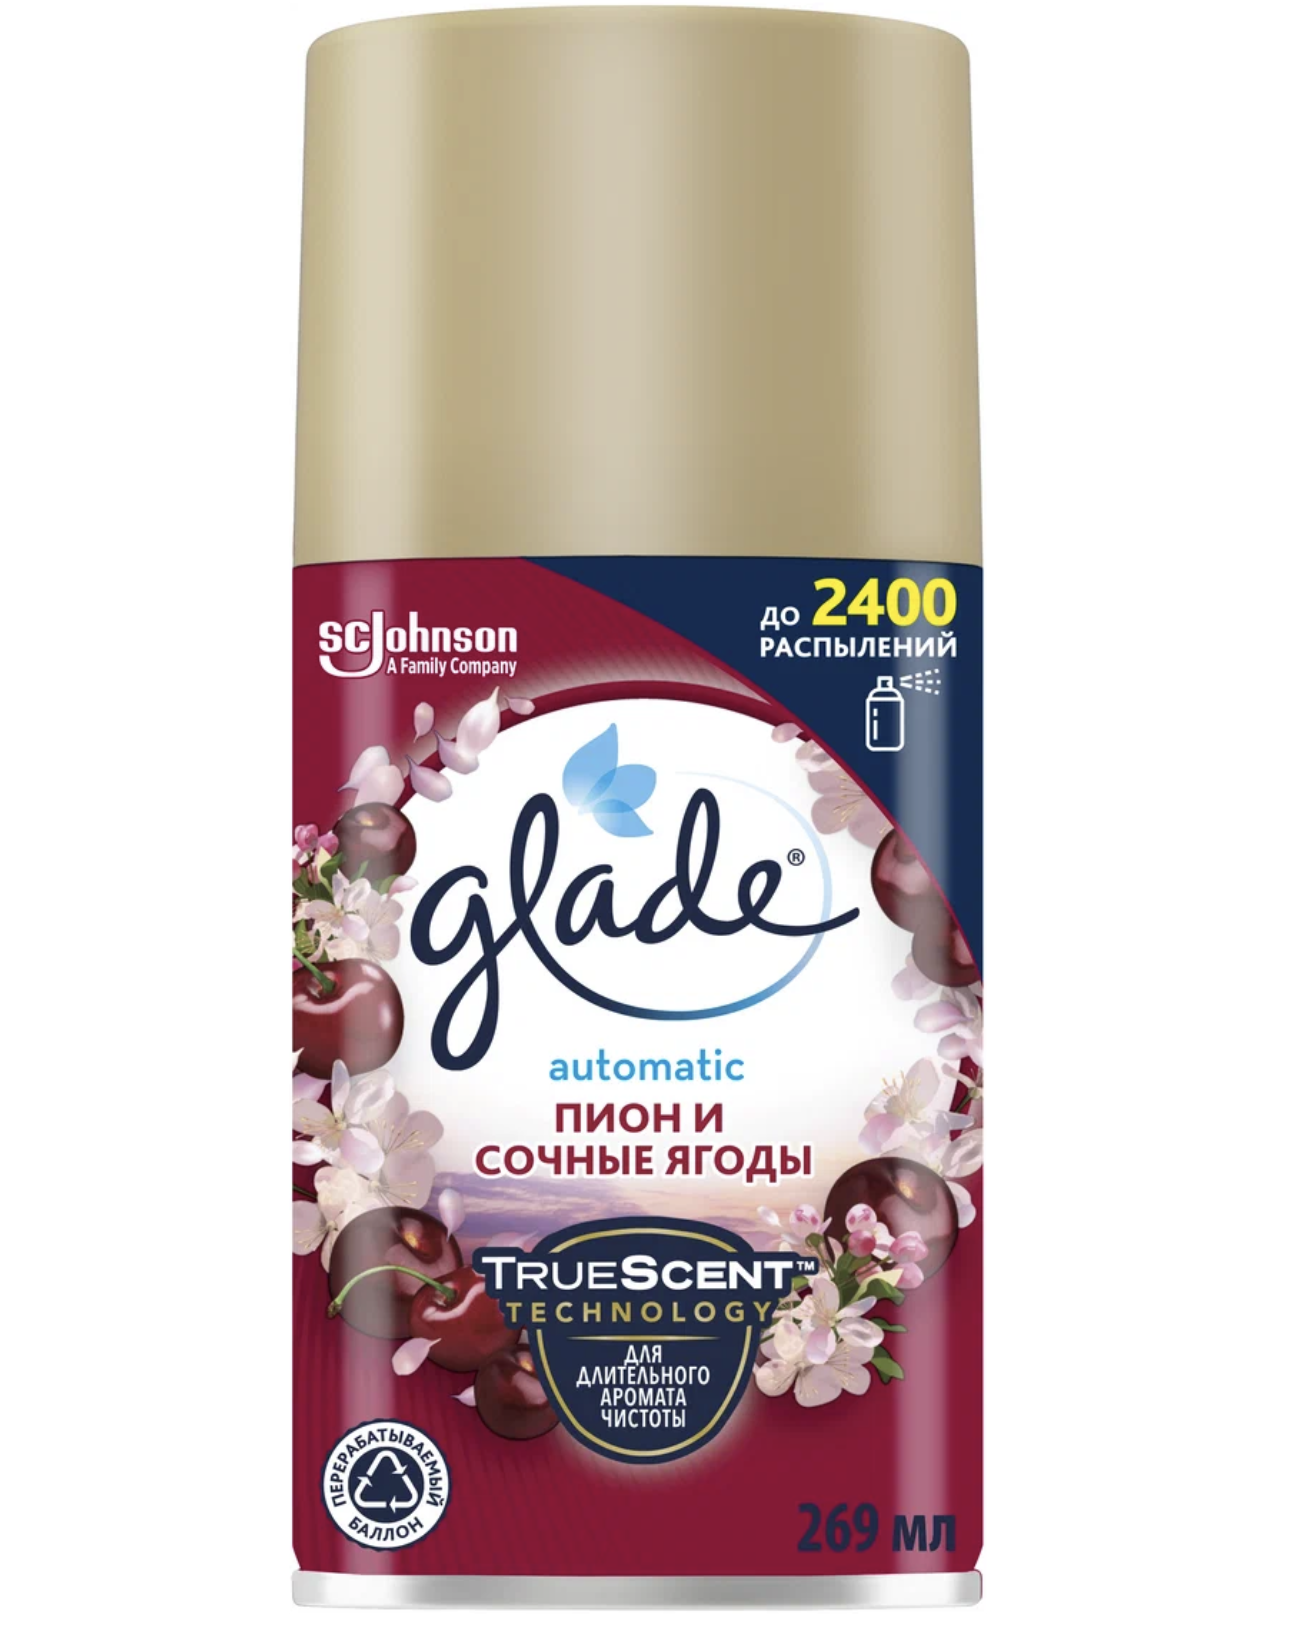   / Glade Automatic     -  , 269 